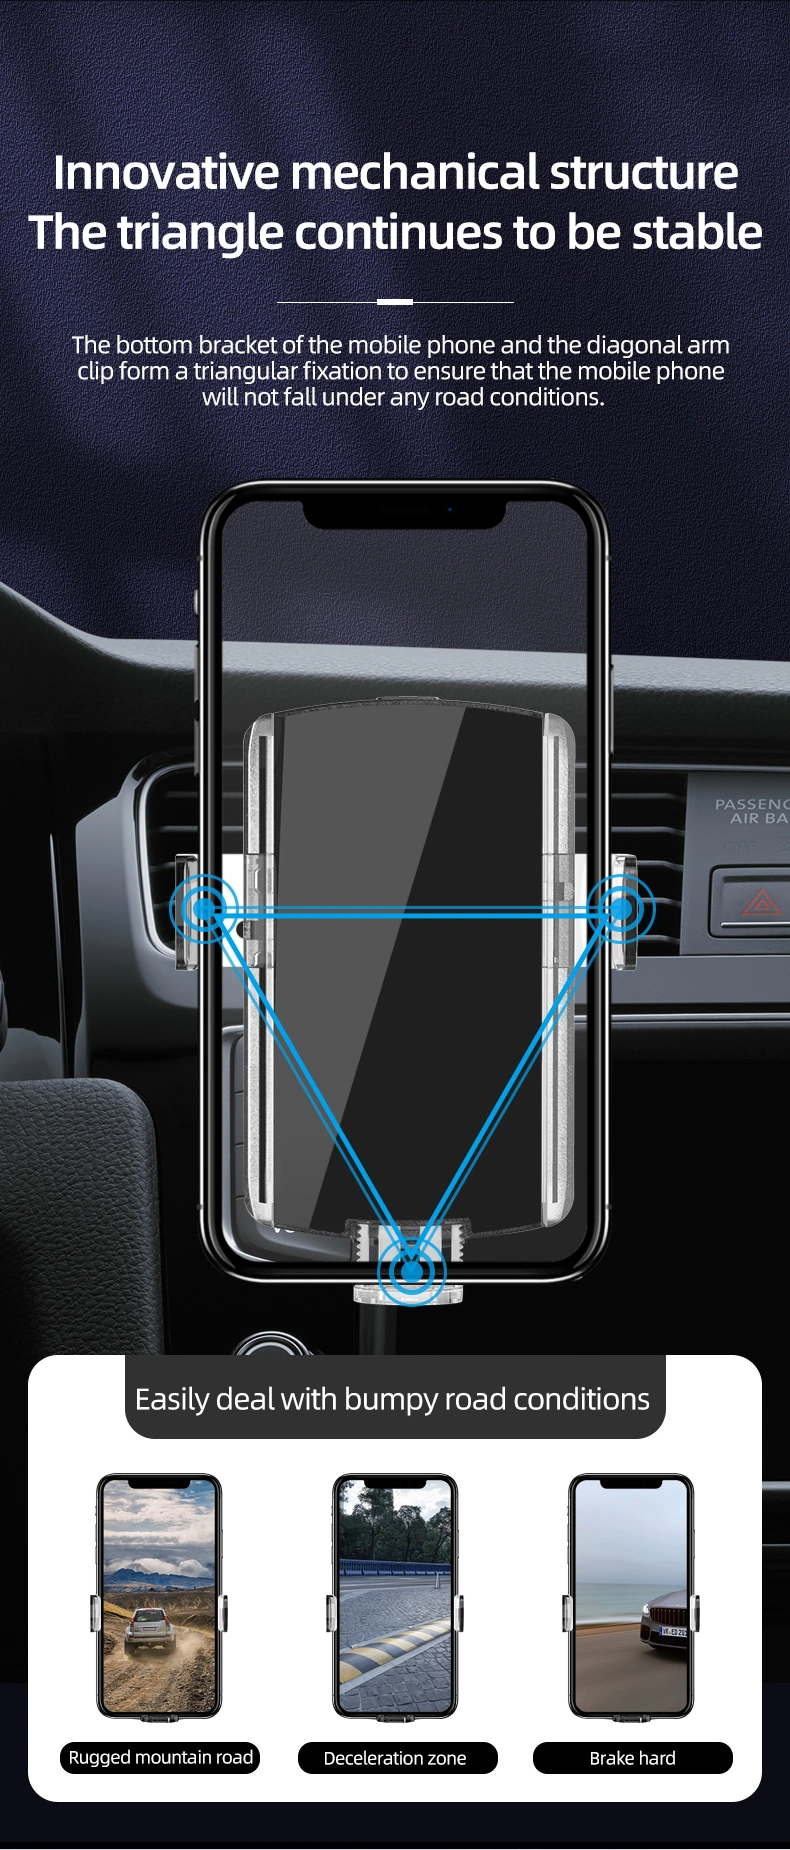 2020 Hot Selling 10W Fast Automatic Induction Wireless Car Charger Phone Holder Qi Wireless Charger with LED Cool Atmosphere Light